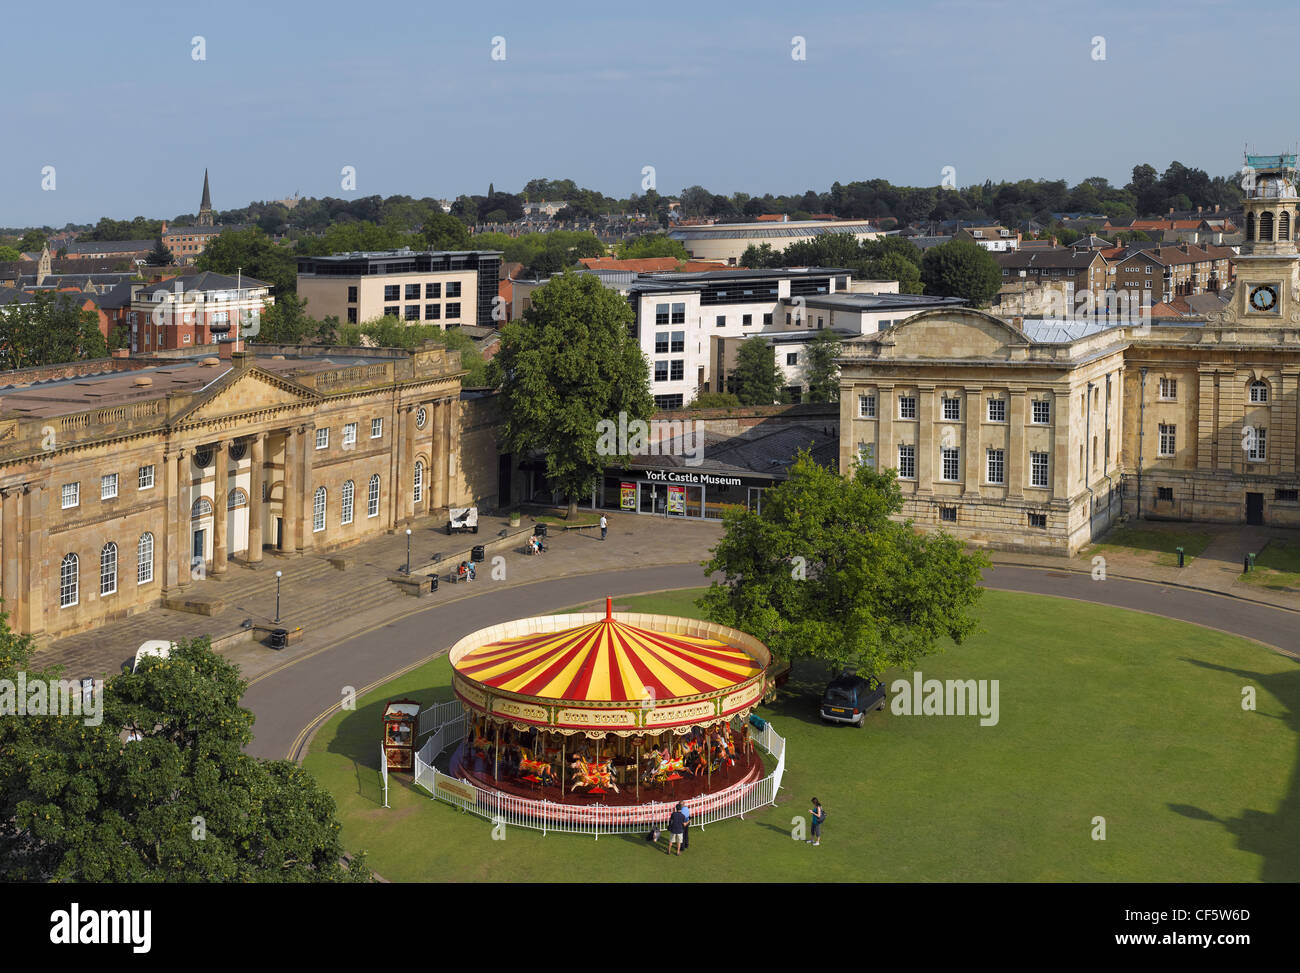 Carousel outside York Castle Museum, one of Britain's leading museums of everyday life. Stock Photo